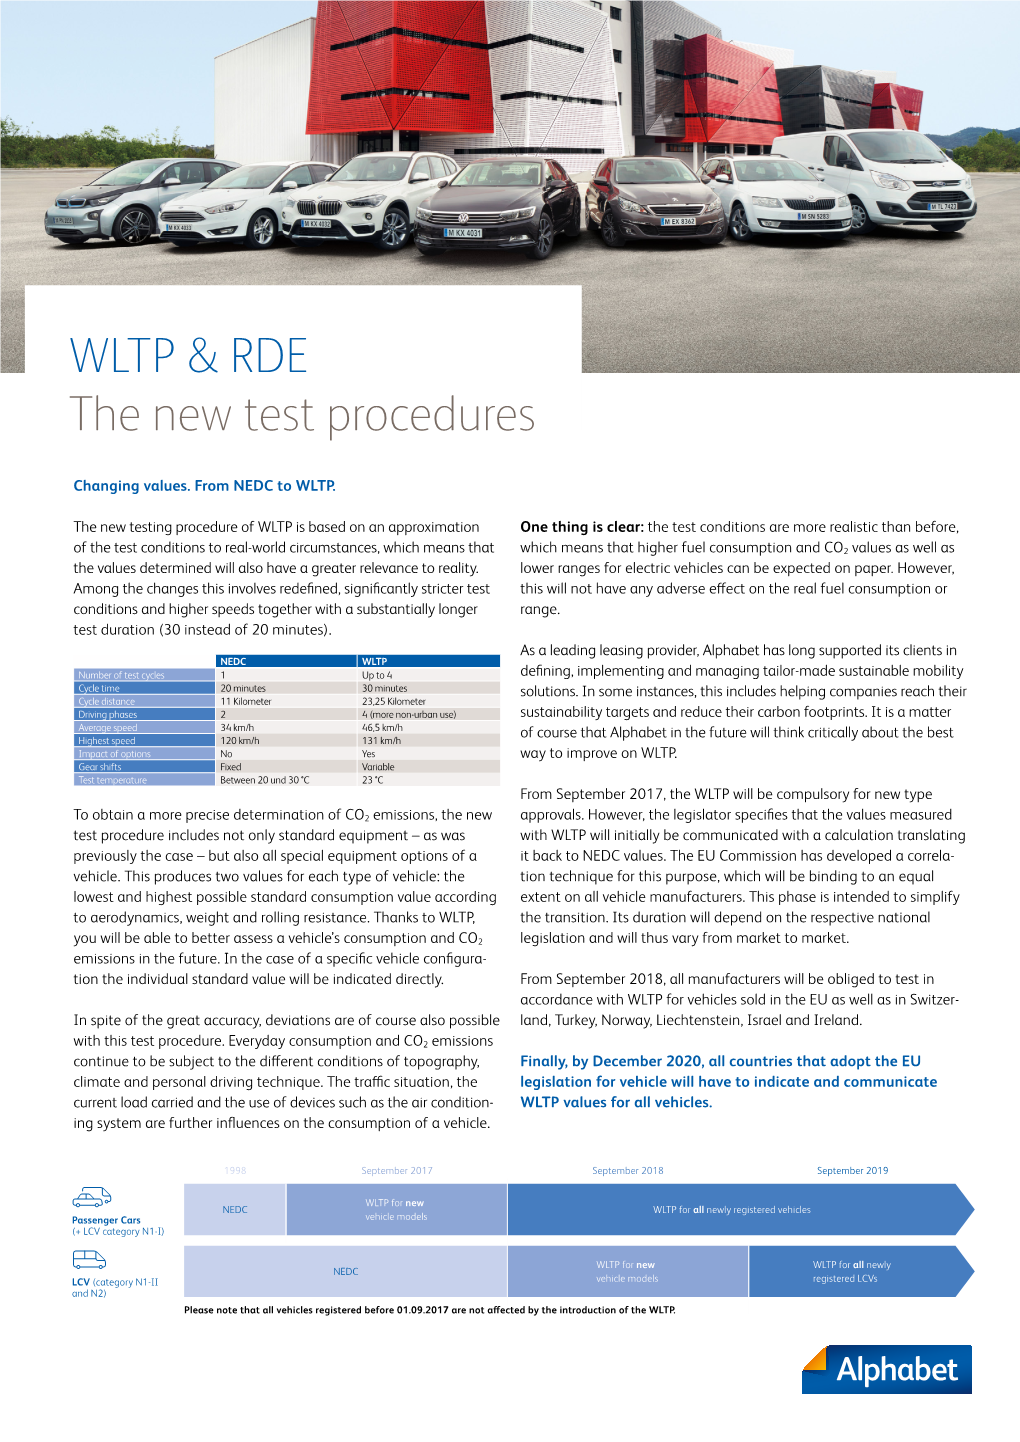 WLTP & RDE the New Test Procedures